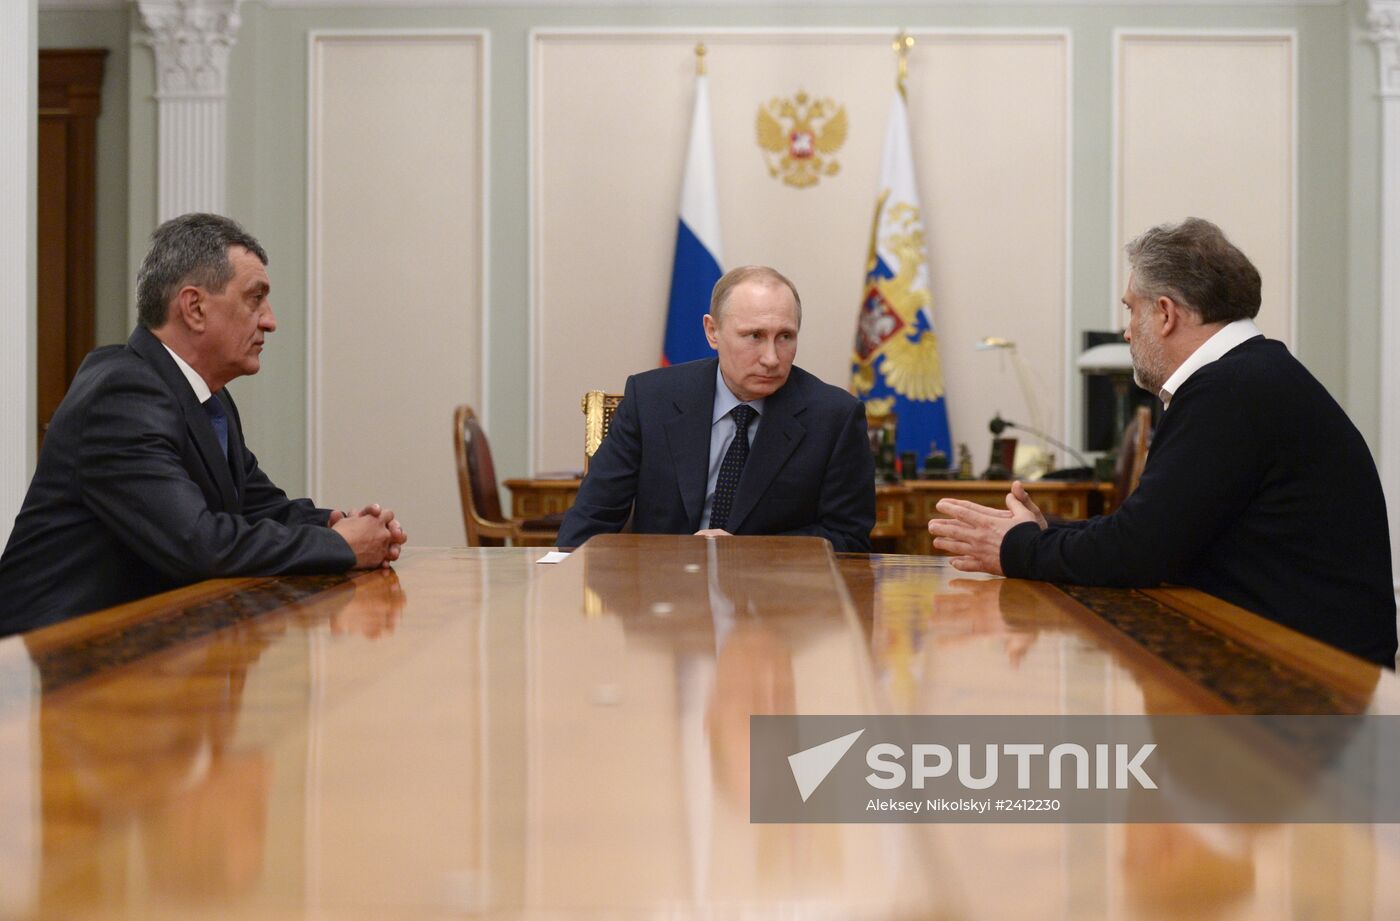 V.Putin meets with S.Menyailo and A.Chaly